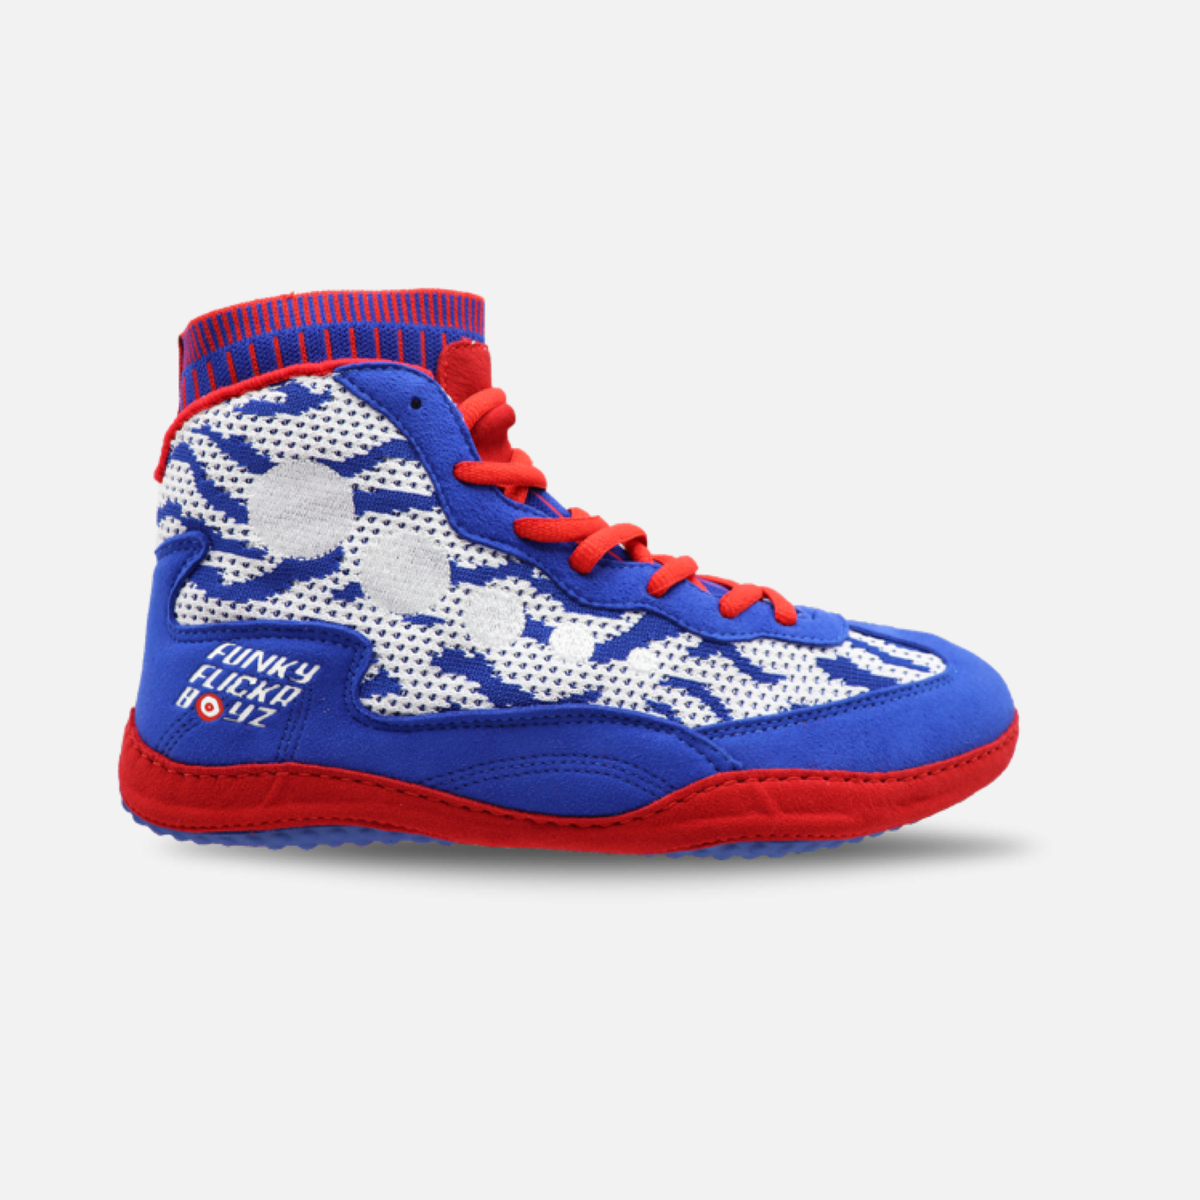 FFB Interlude &quot;1776&quot; Wrestling Shoes - Funky Flickr Boyz Gear